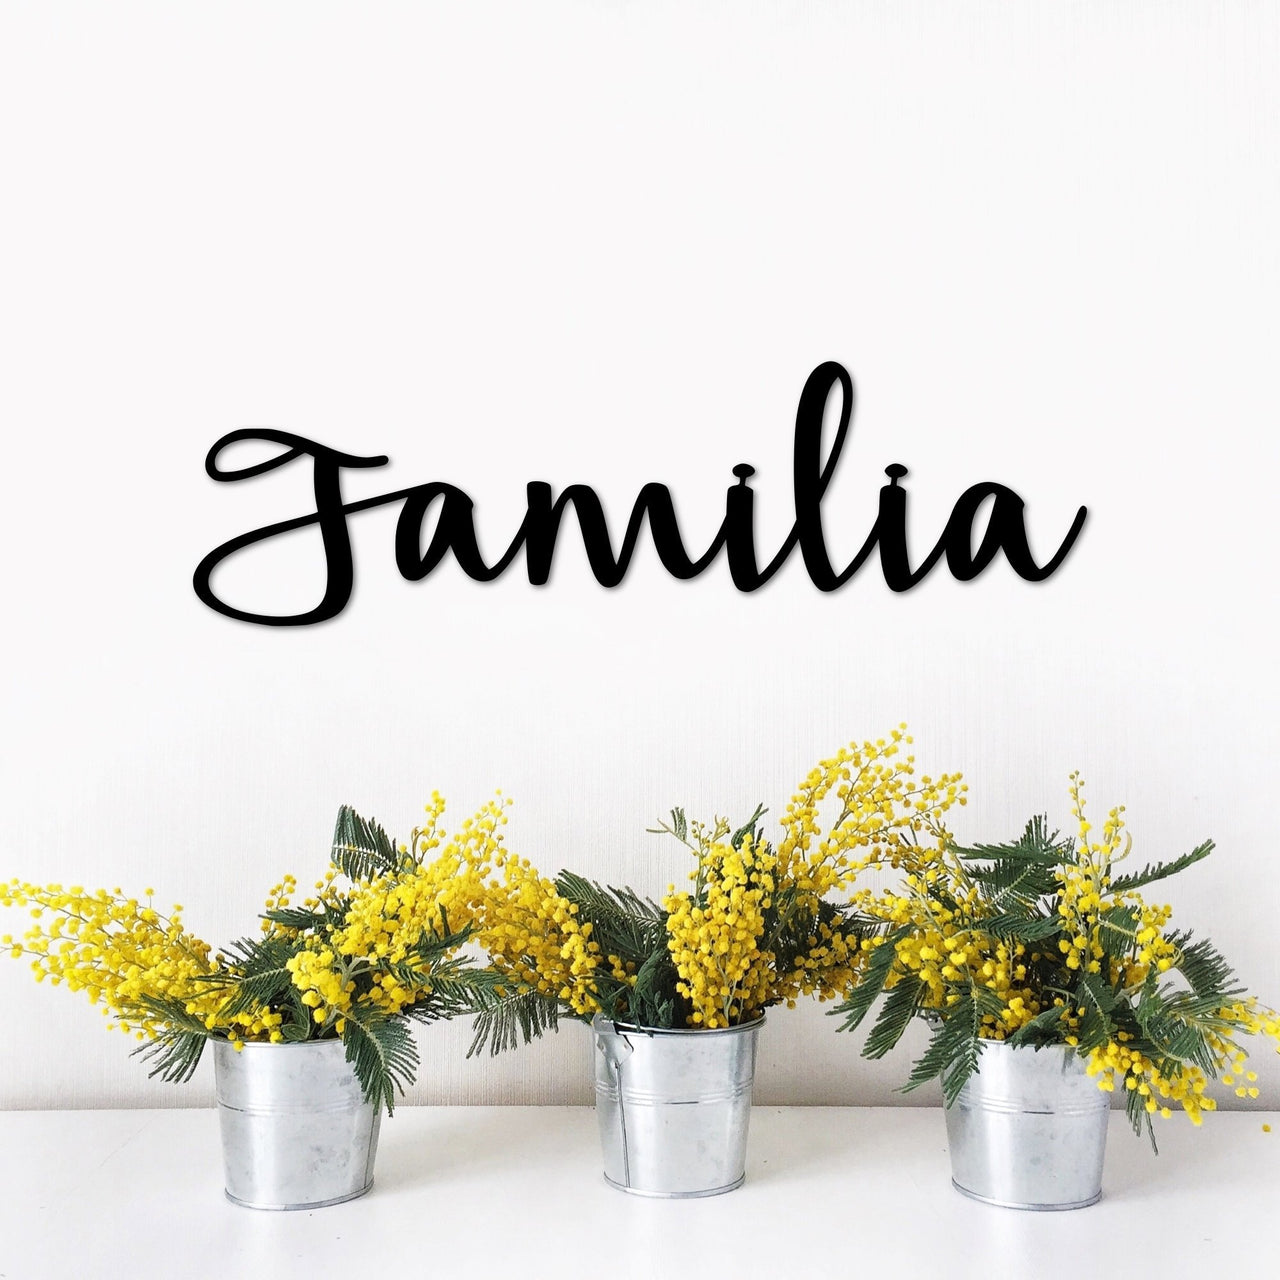 Familia Metal Sign | Steel Script Words for the Wall | Spanish Family Cursive Word Metal Wall Decor | Family Room Decor | Family Photo Wall